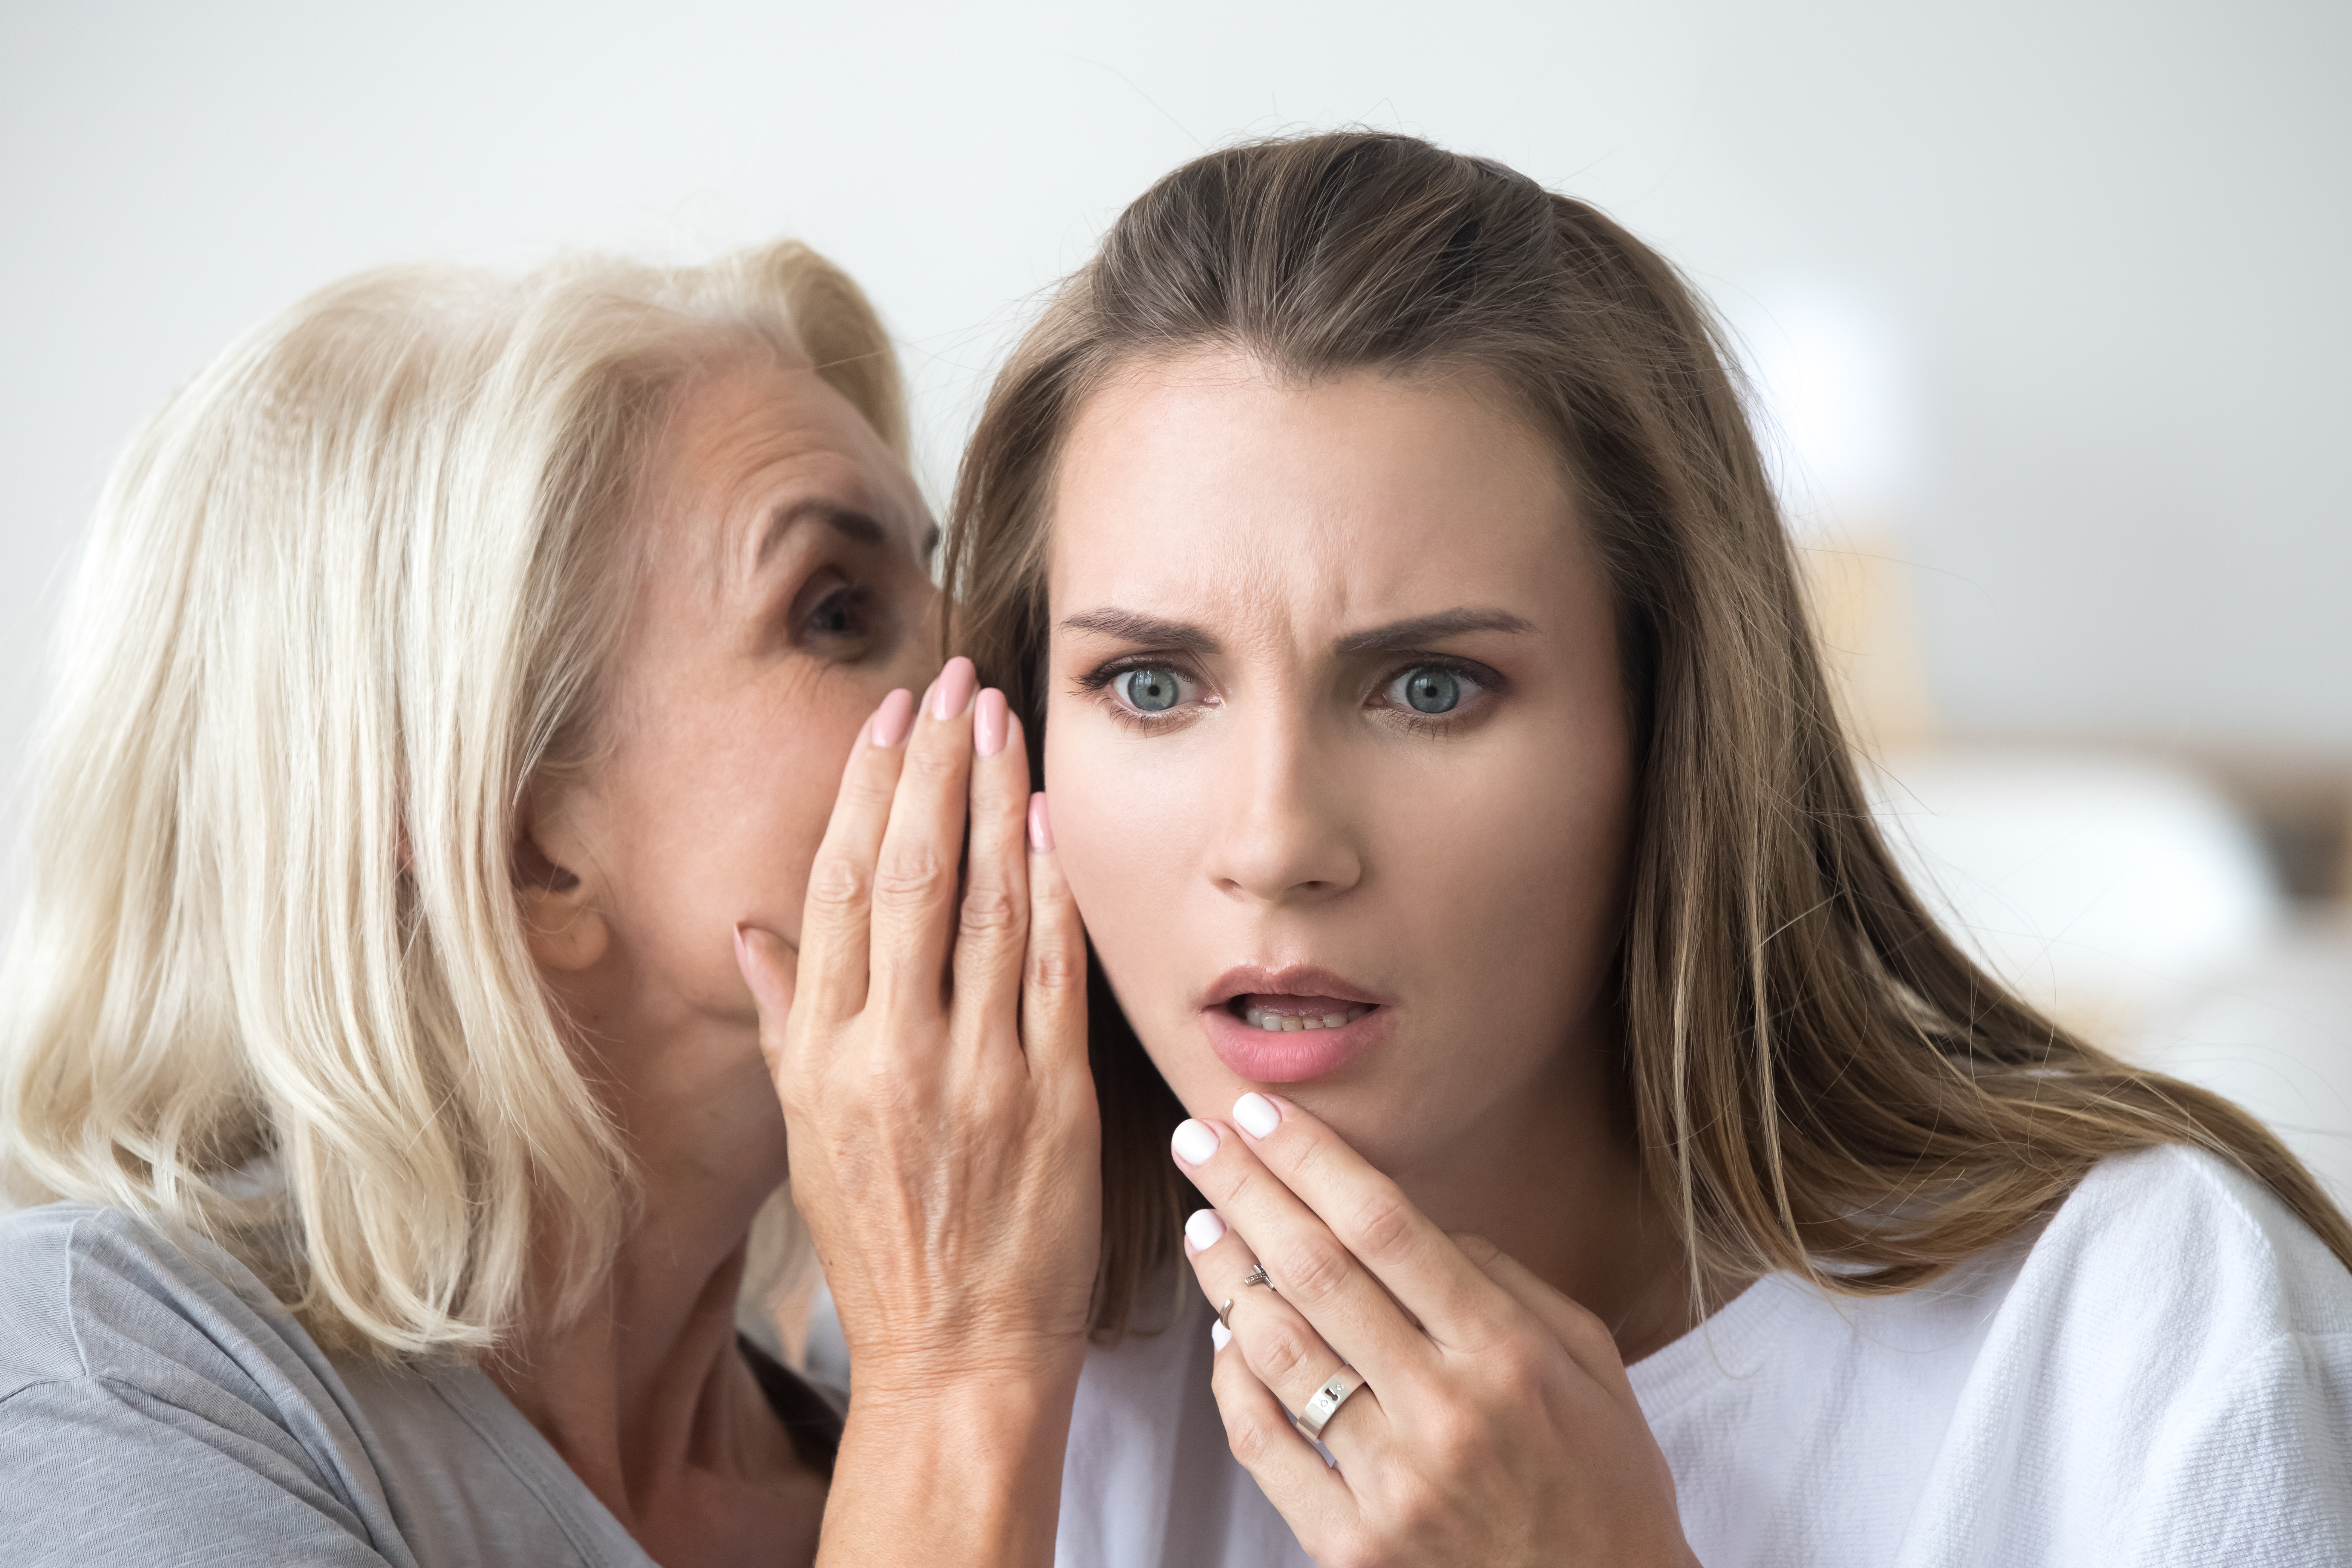 A woman whispering to another woman | Source: Shutterstock